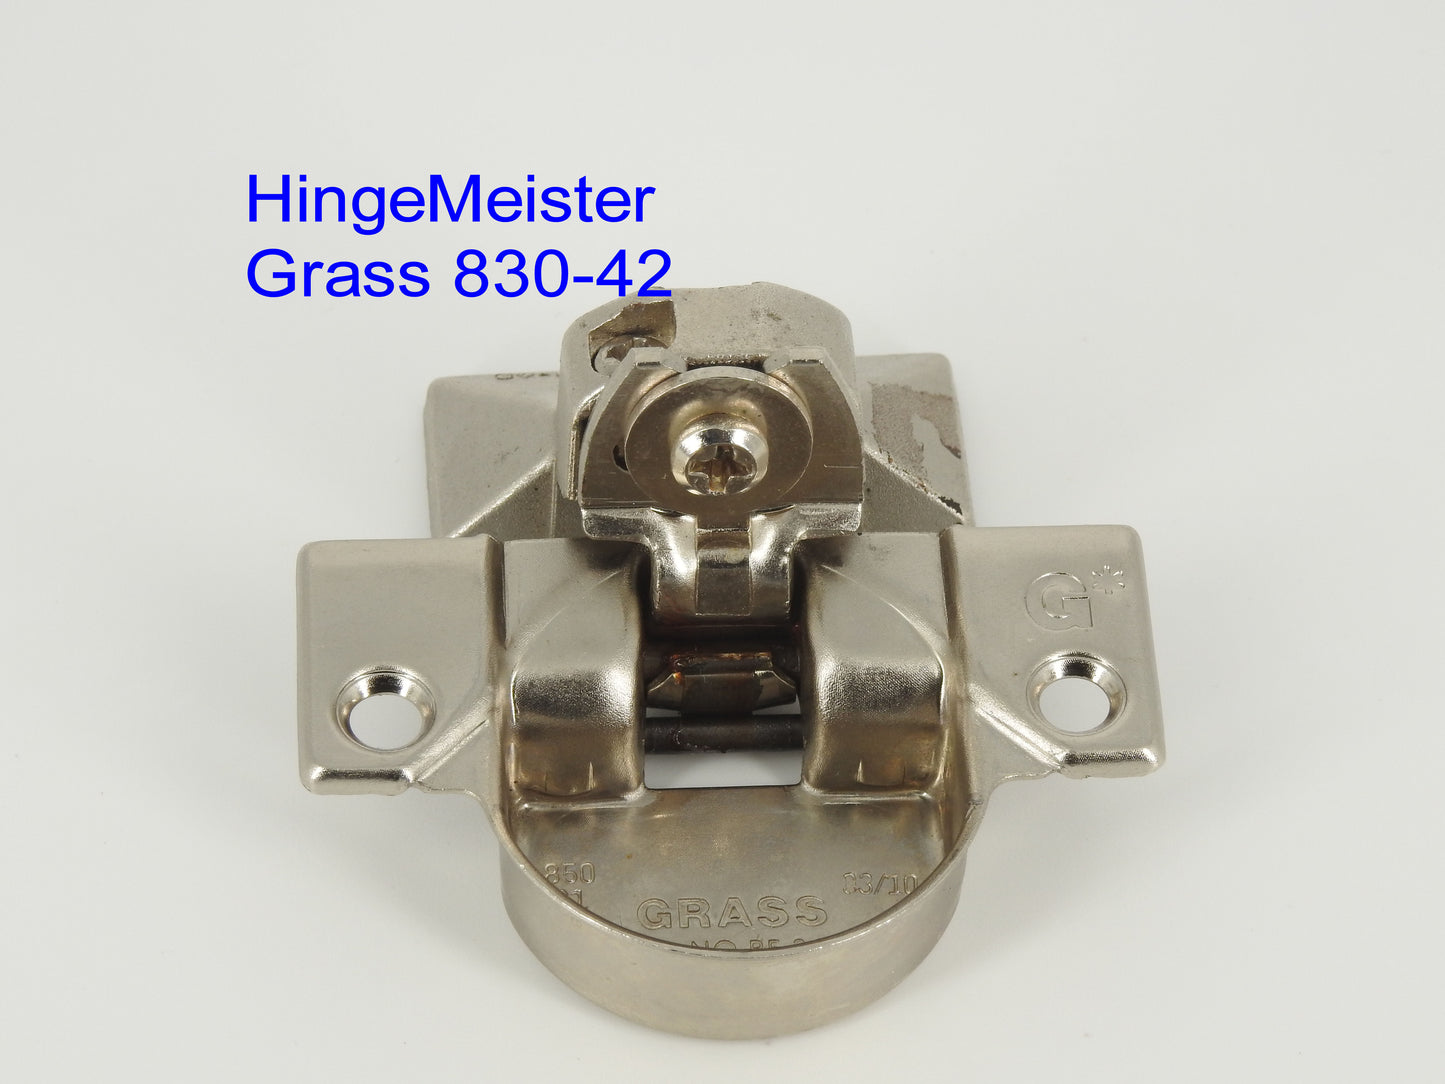 Grass 850 hinge with the 830-42 Nickel mounting plate - Complete Hinge